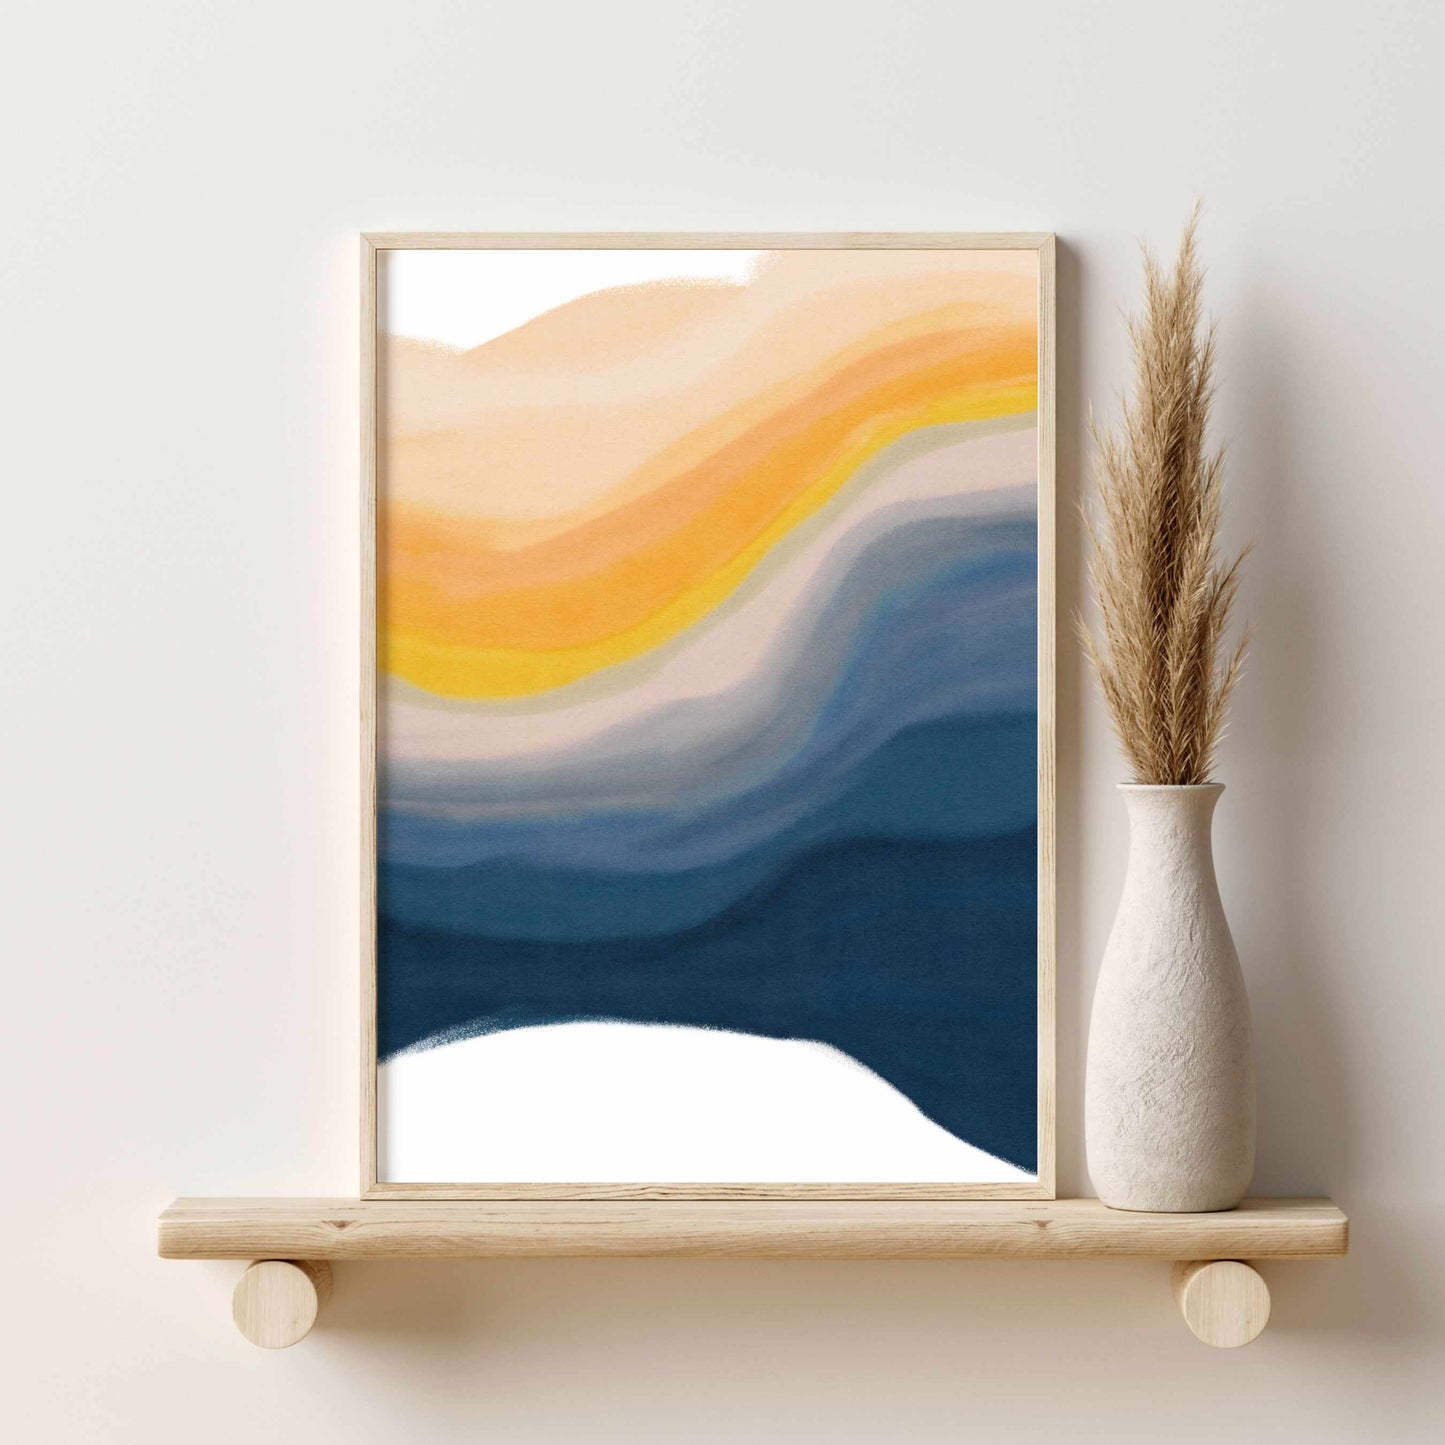 Printed 3 Piece Colorful Abstract Wall Art